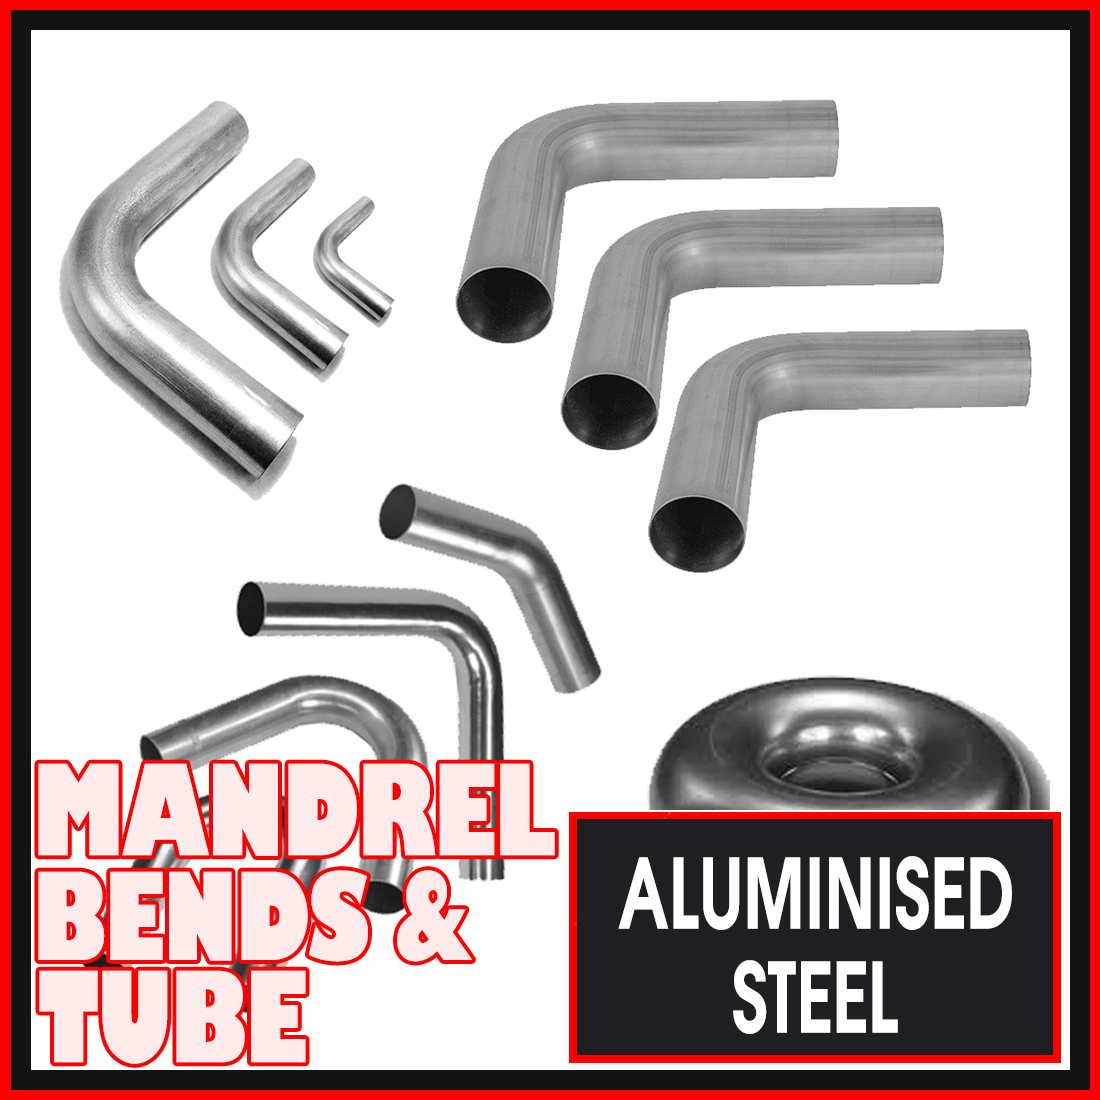 1 1/4" Aluminised Steel Mandrel Bends and Exhaust Pipe image